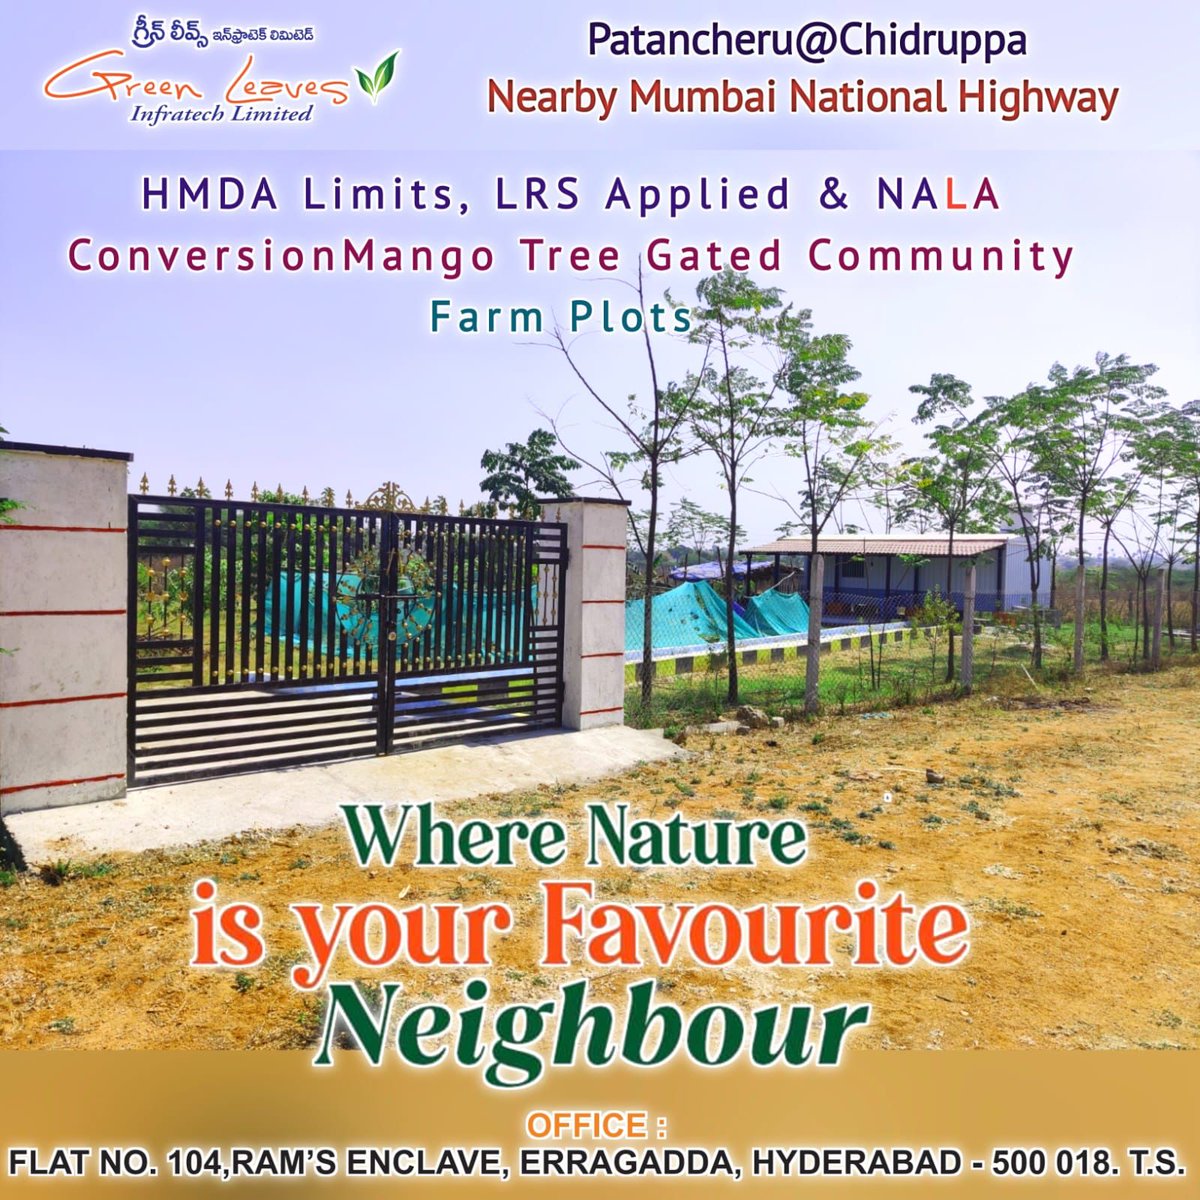 #MANGO TREE GATED COMMUNITY FARMLAND  SALE
Indresham near Patancheruvu
# LRS Applied Gated Community    
   Farmplots,
# Mango Tree Plantations with
    3 Yrs Maintenance and Lease,
# Lease Agreement provided,
Contact me for more details: 8143733408